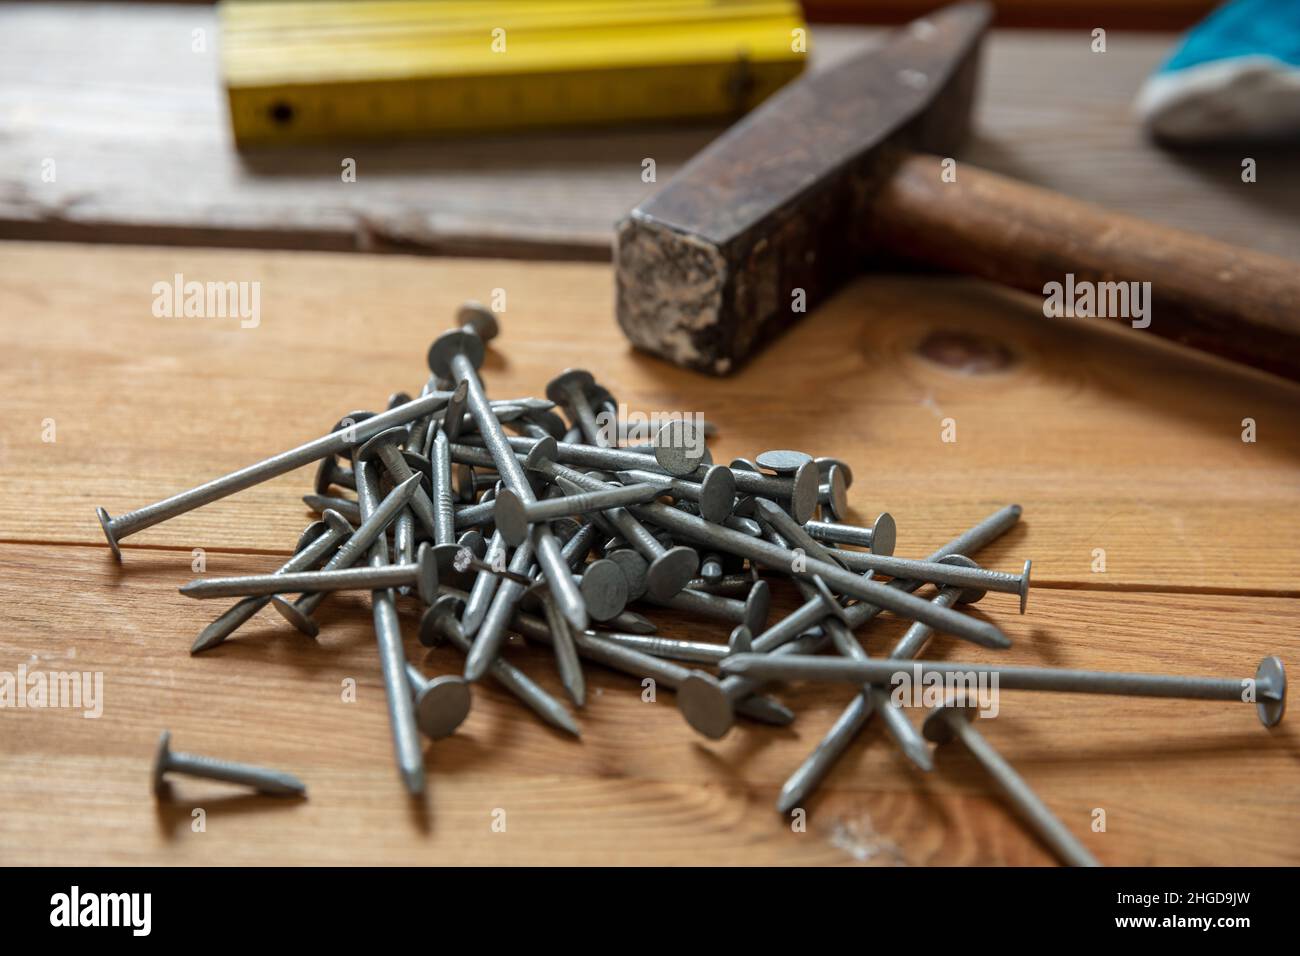 Hammer and nail stack on wood. Carpenter work bench table, closeup view, joinery workshop Stock Photo